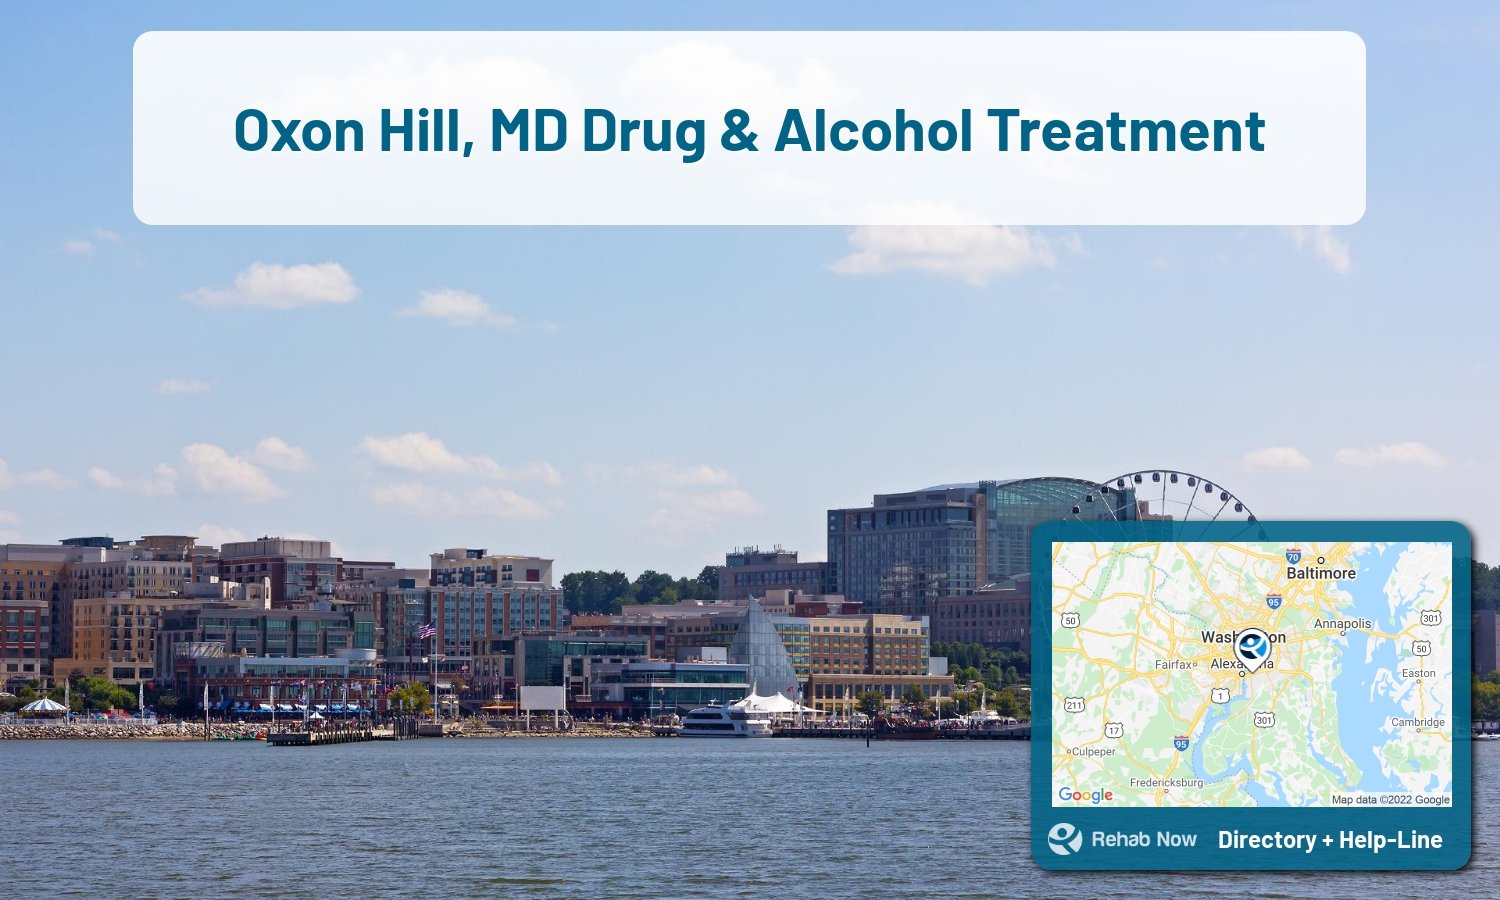 View options, availability, treatment methods, and more, for drug rehab and alcohol treatment in Oxon Hill, Maryland